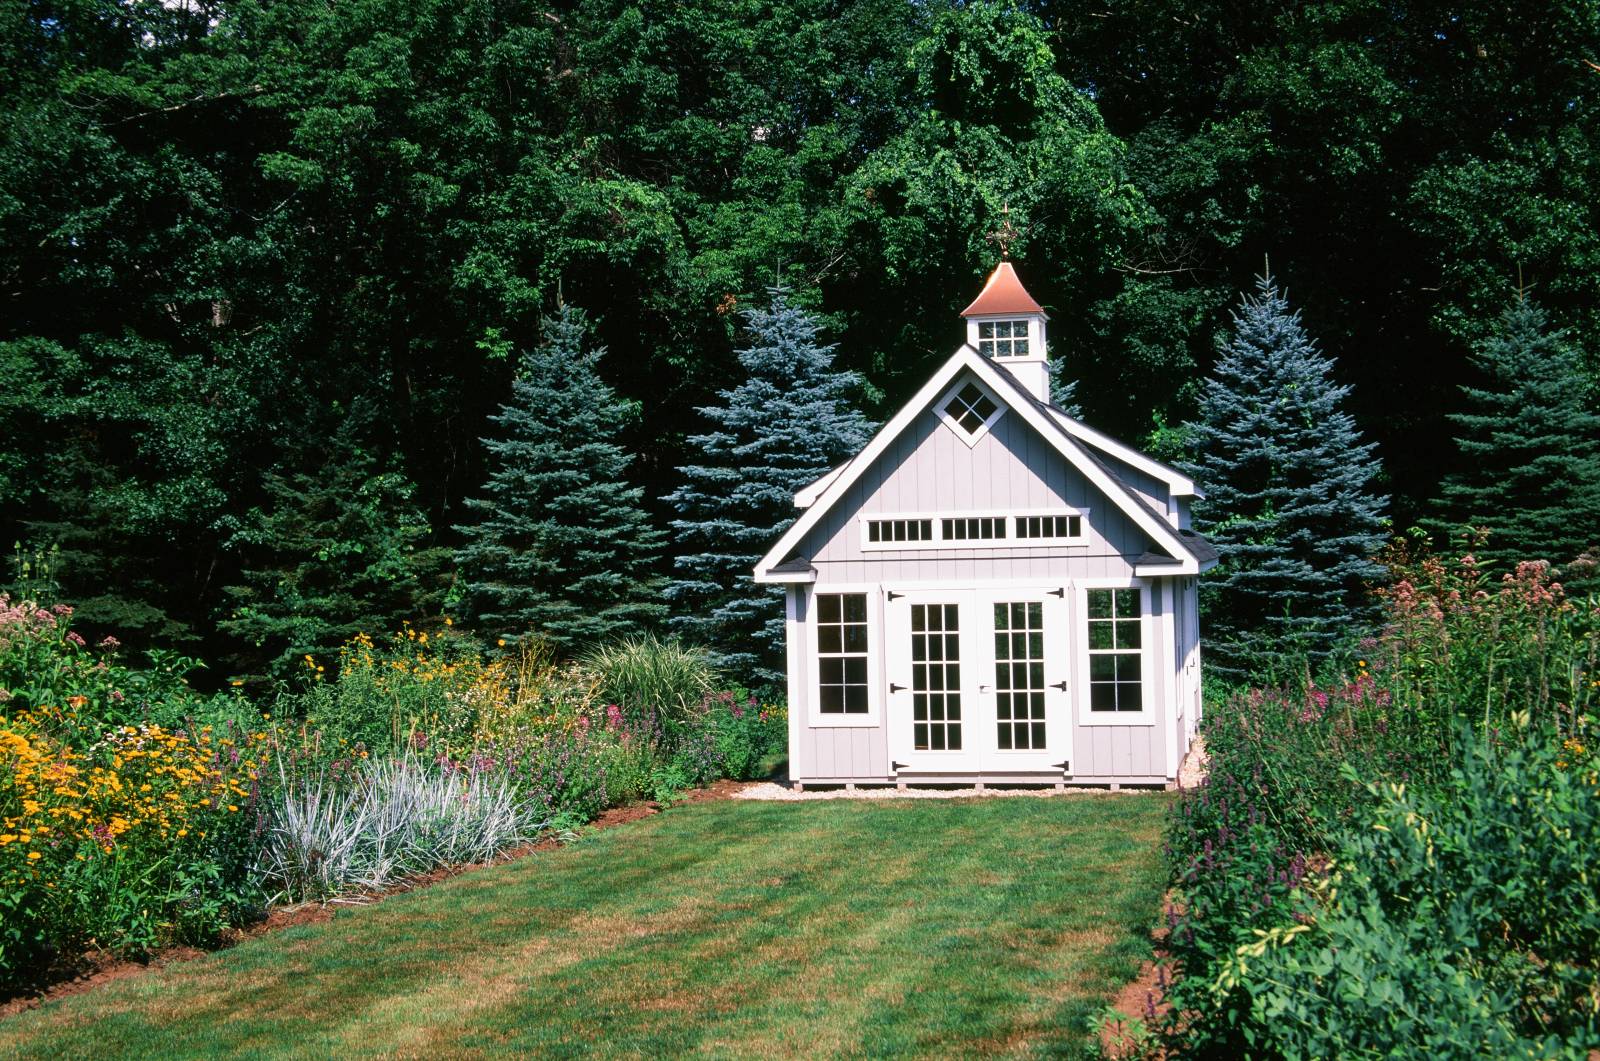 Garden Shed Nestled in the English Garden